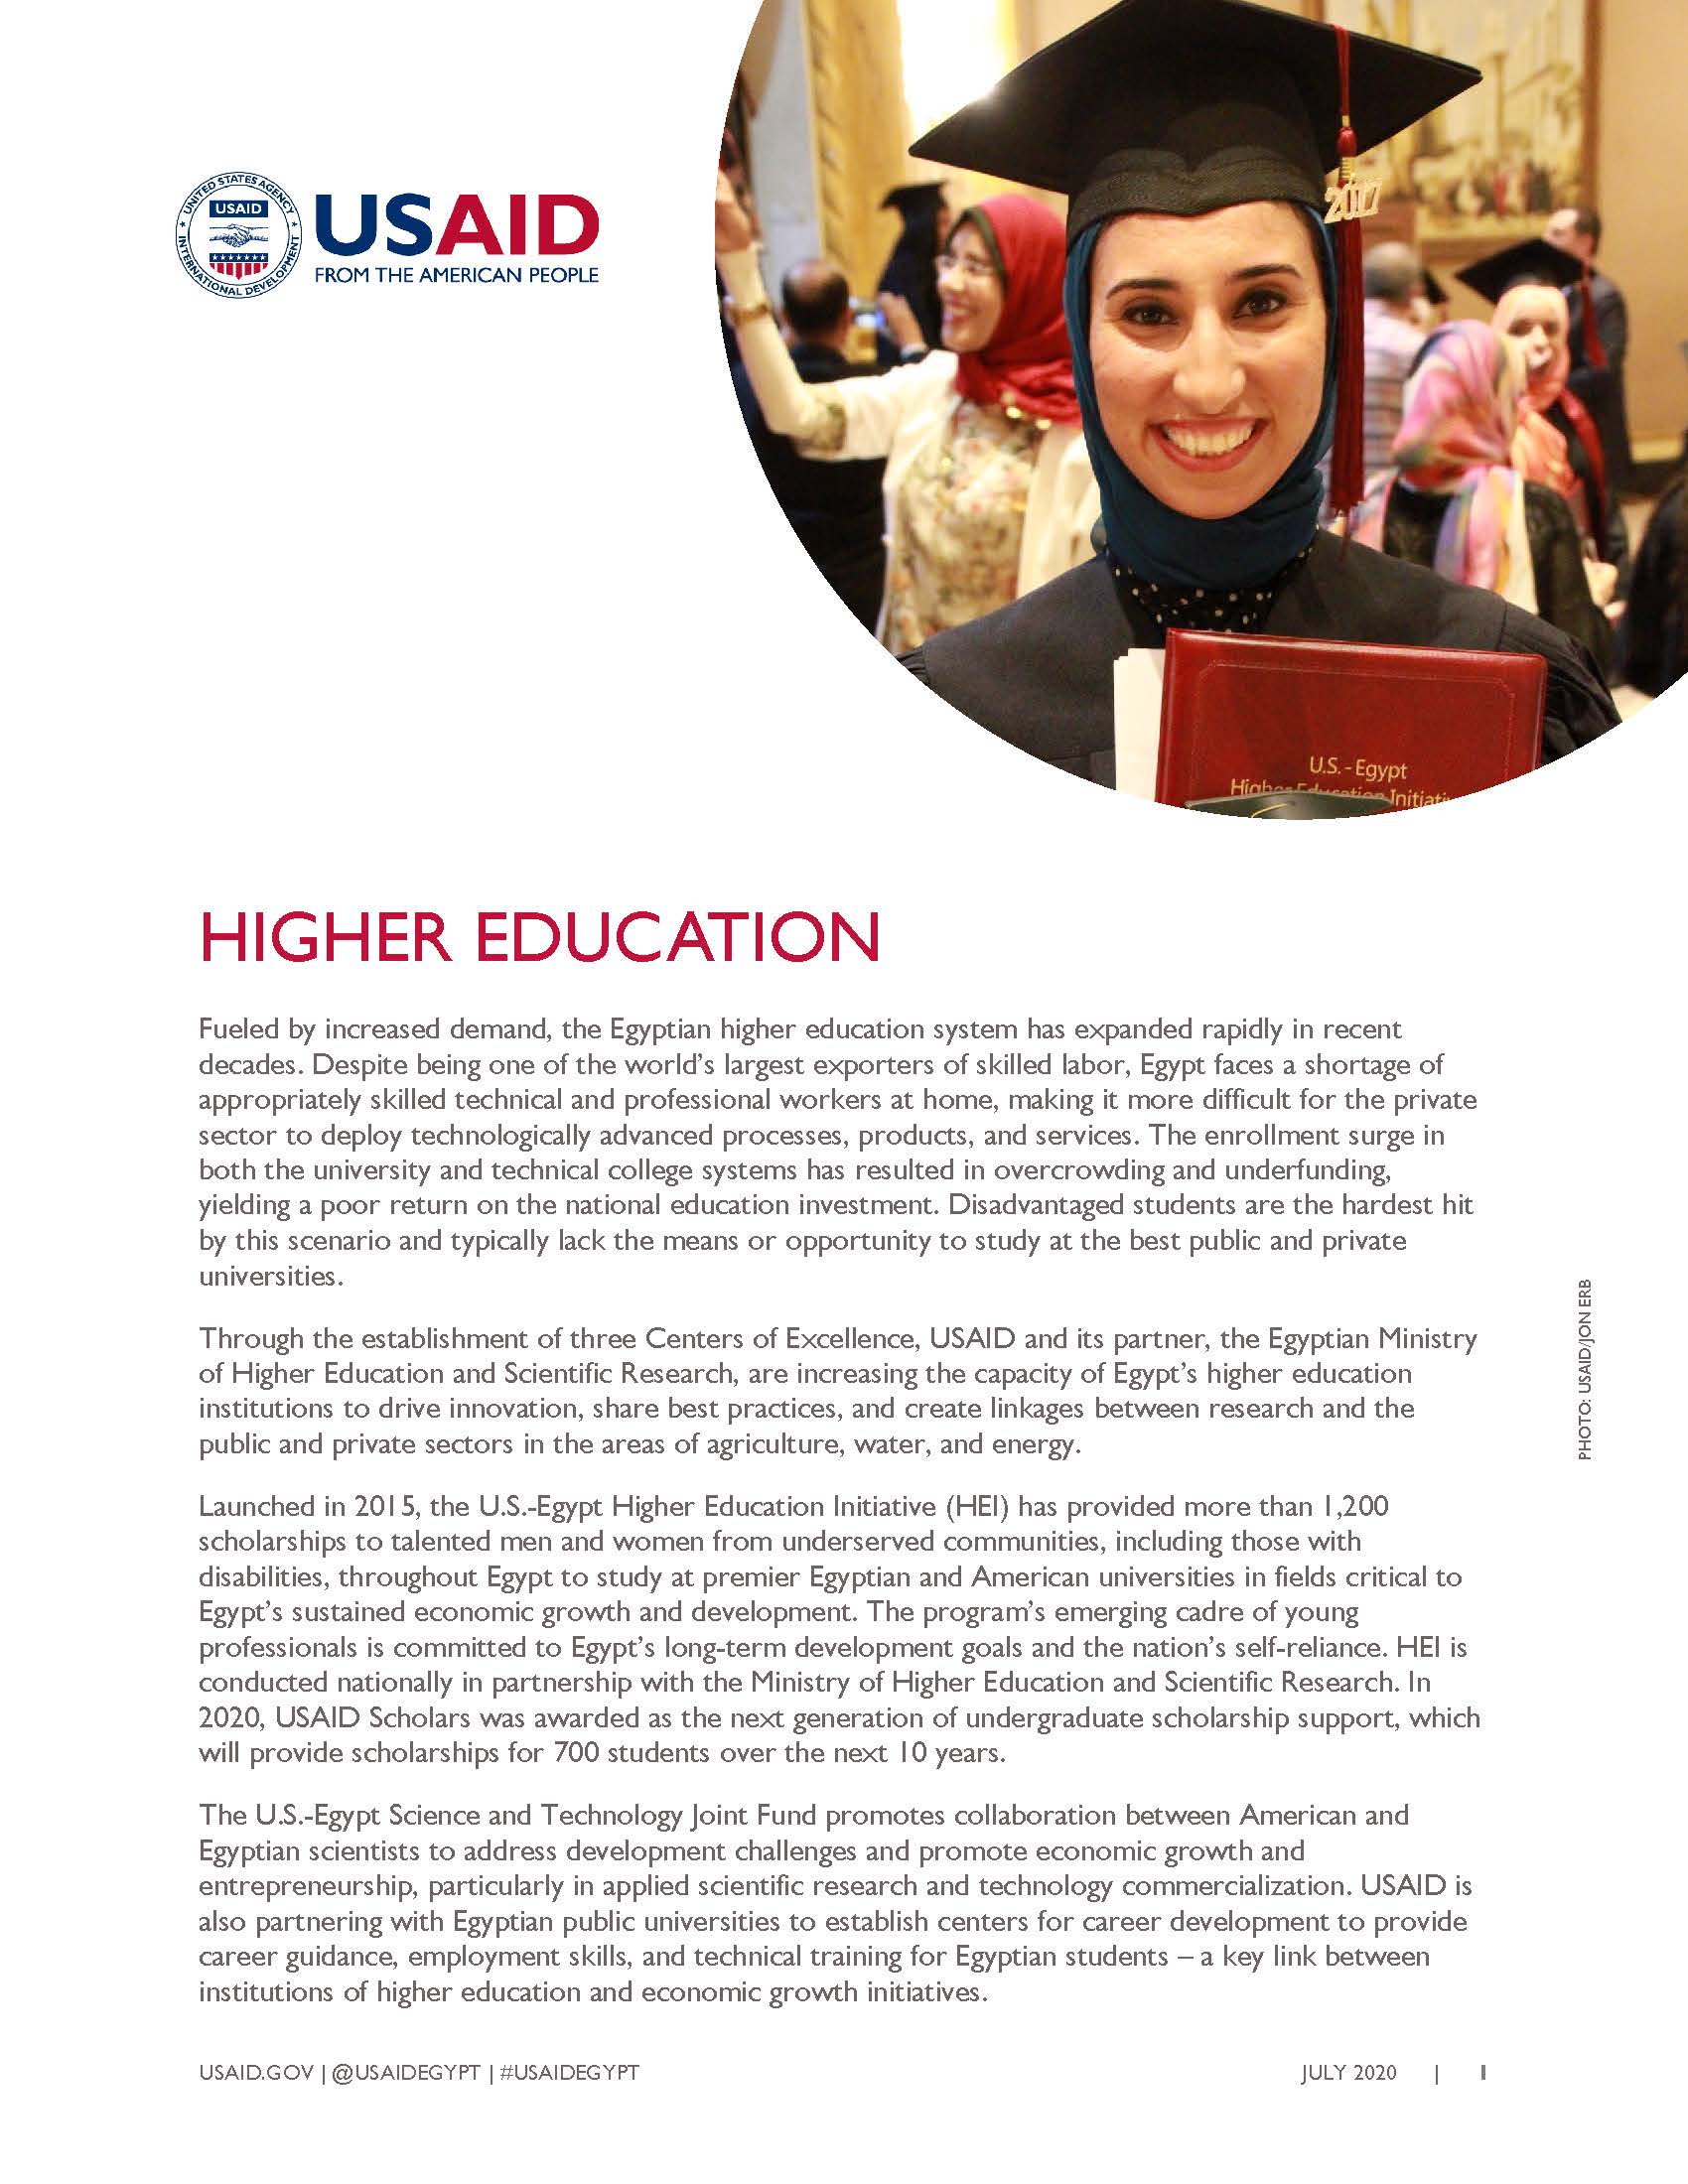 USAID/Egypt Fact Sheet: Higher Education